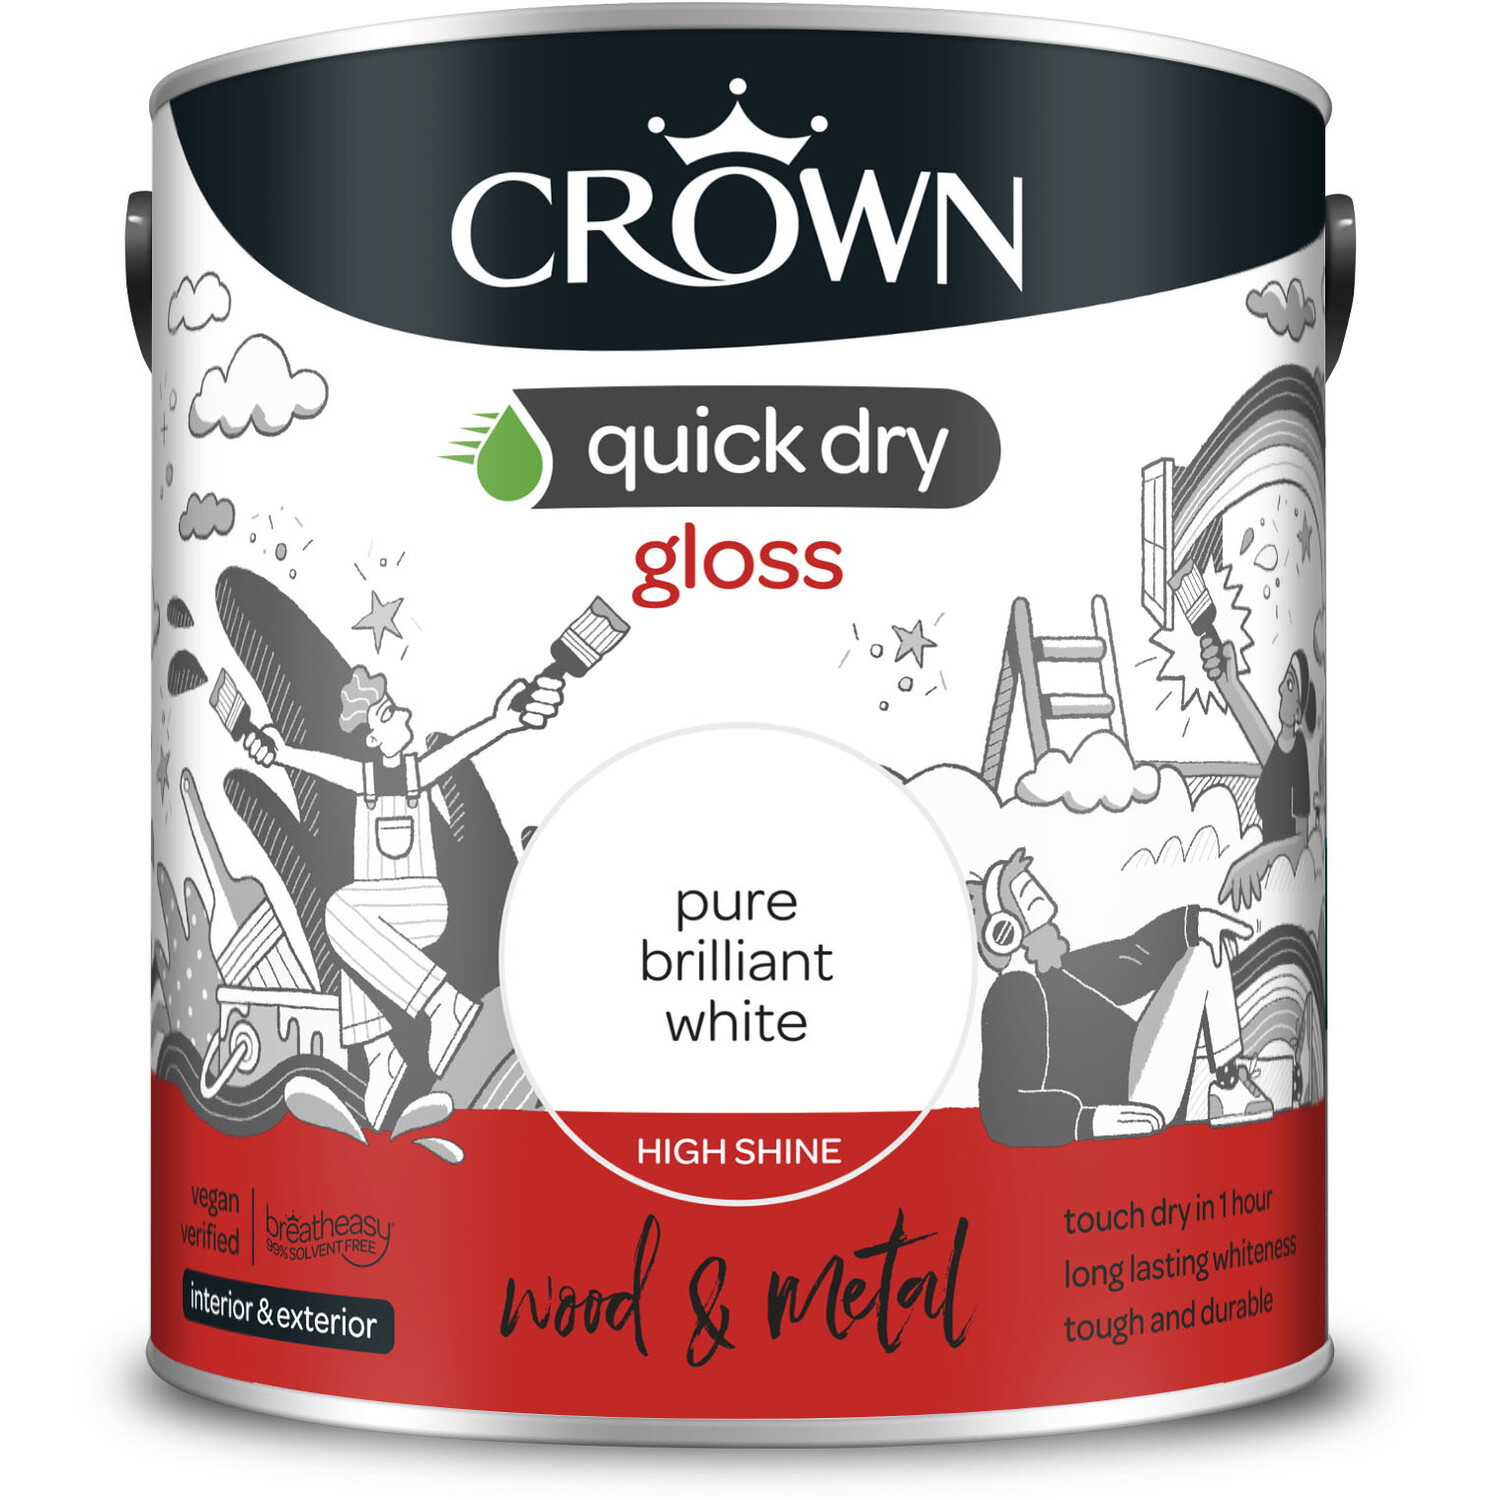 Crown Quick Dry Wood and Metal Pure Brilliant White Gloss Paint 2.5L Image 2